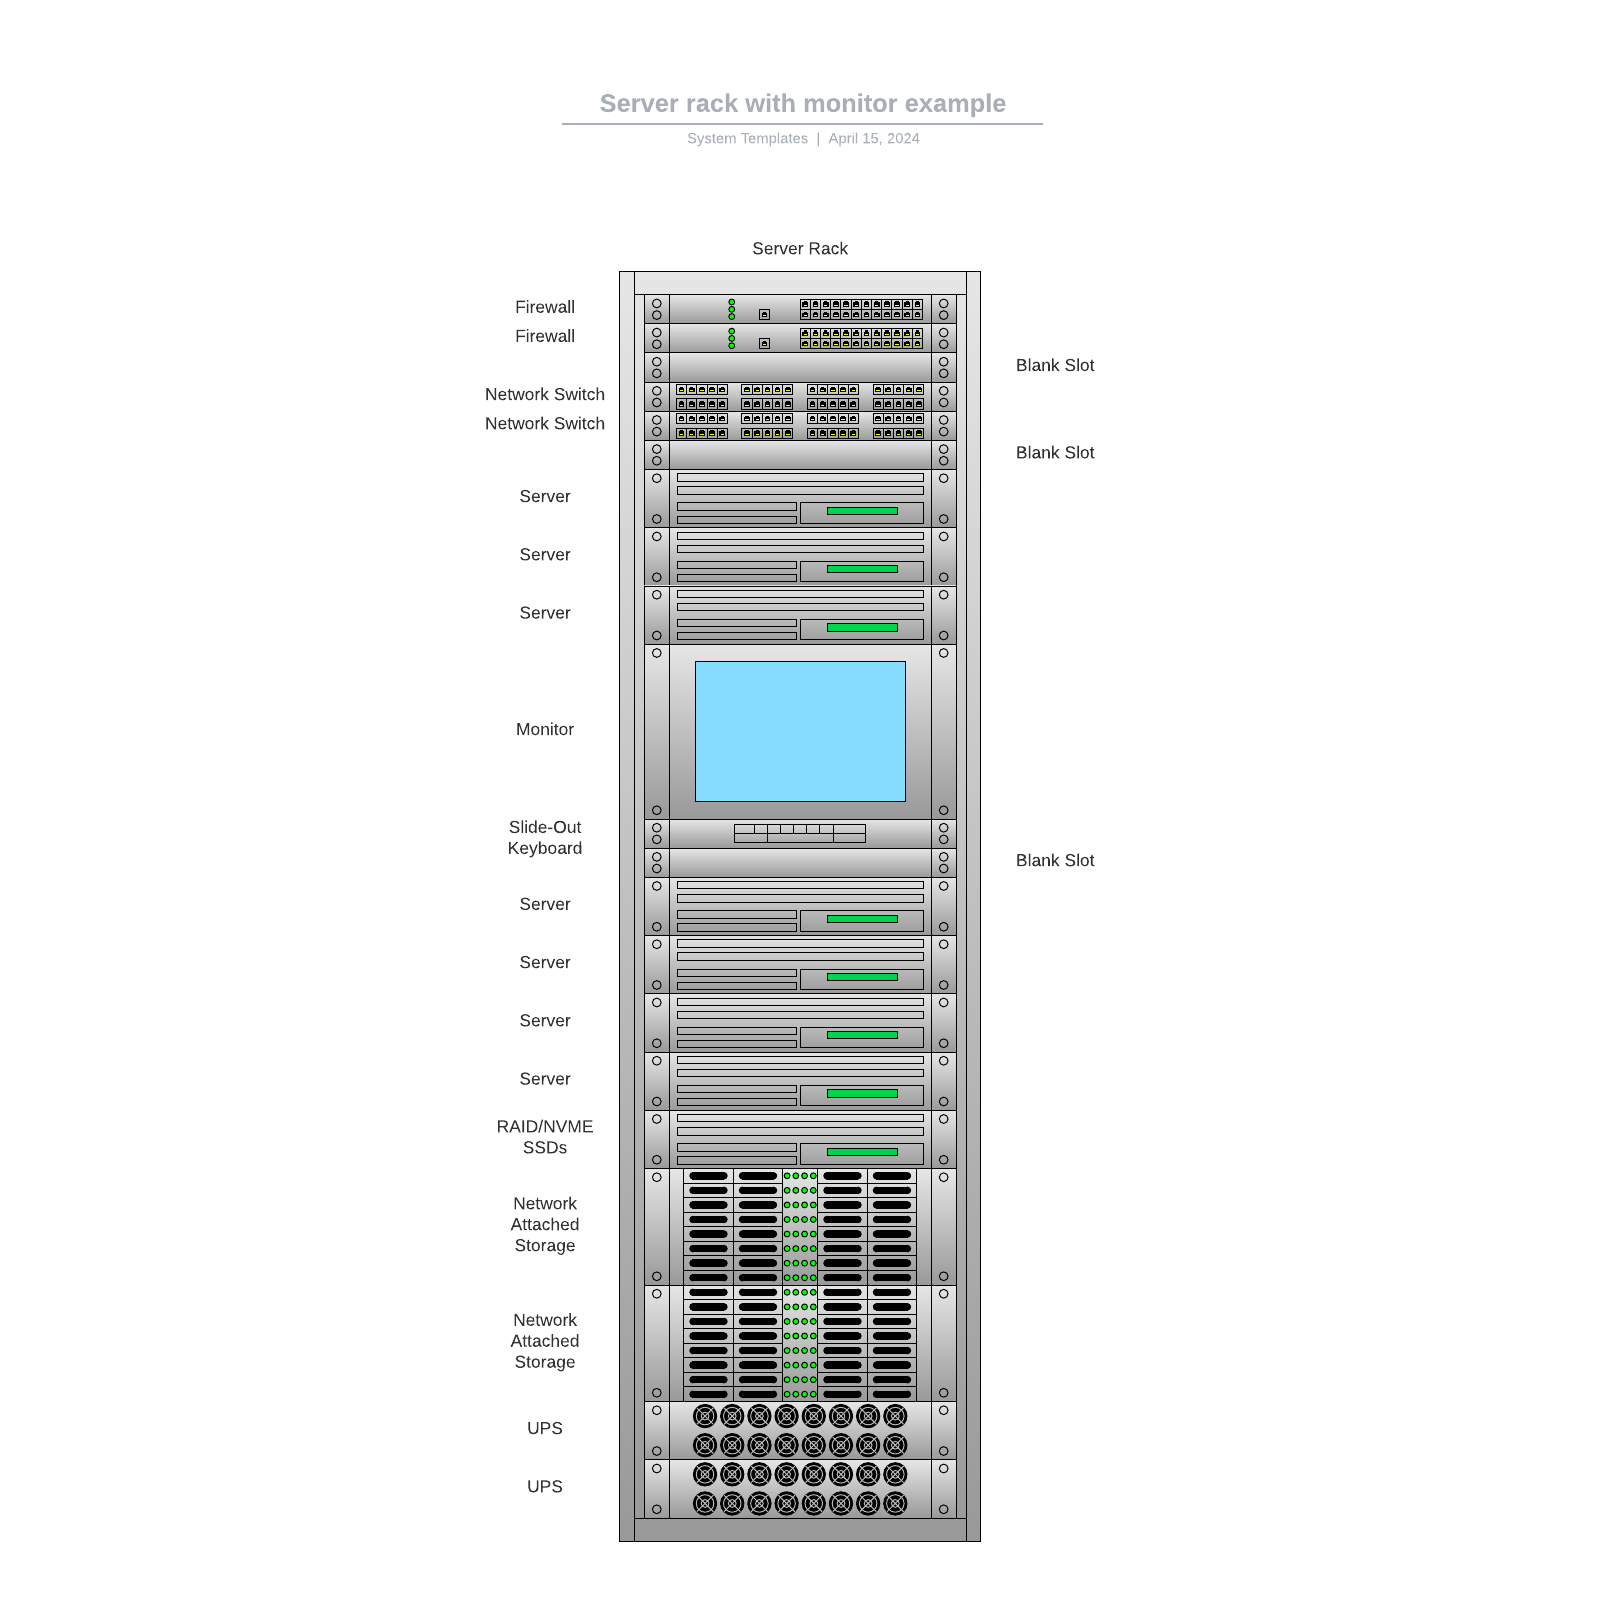 Server rack with monitor example example